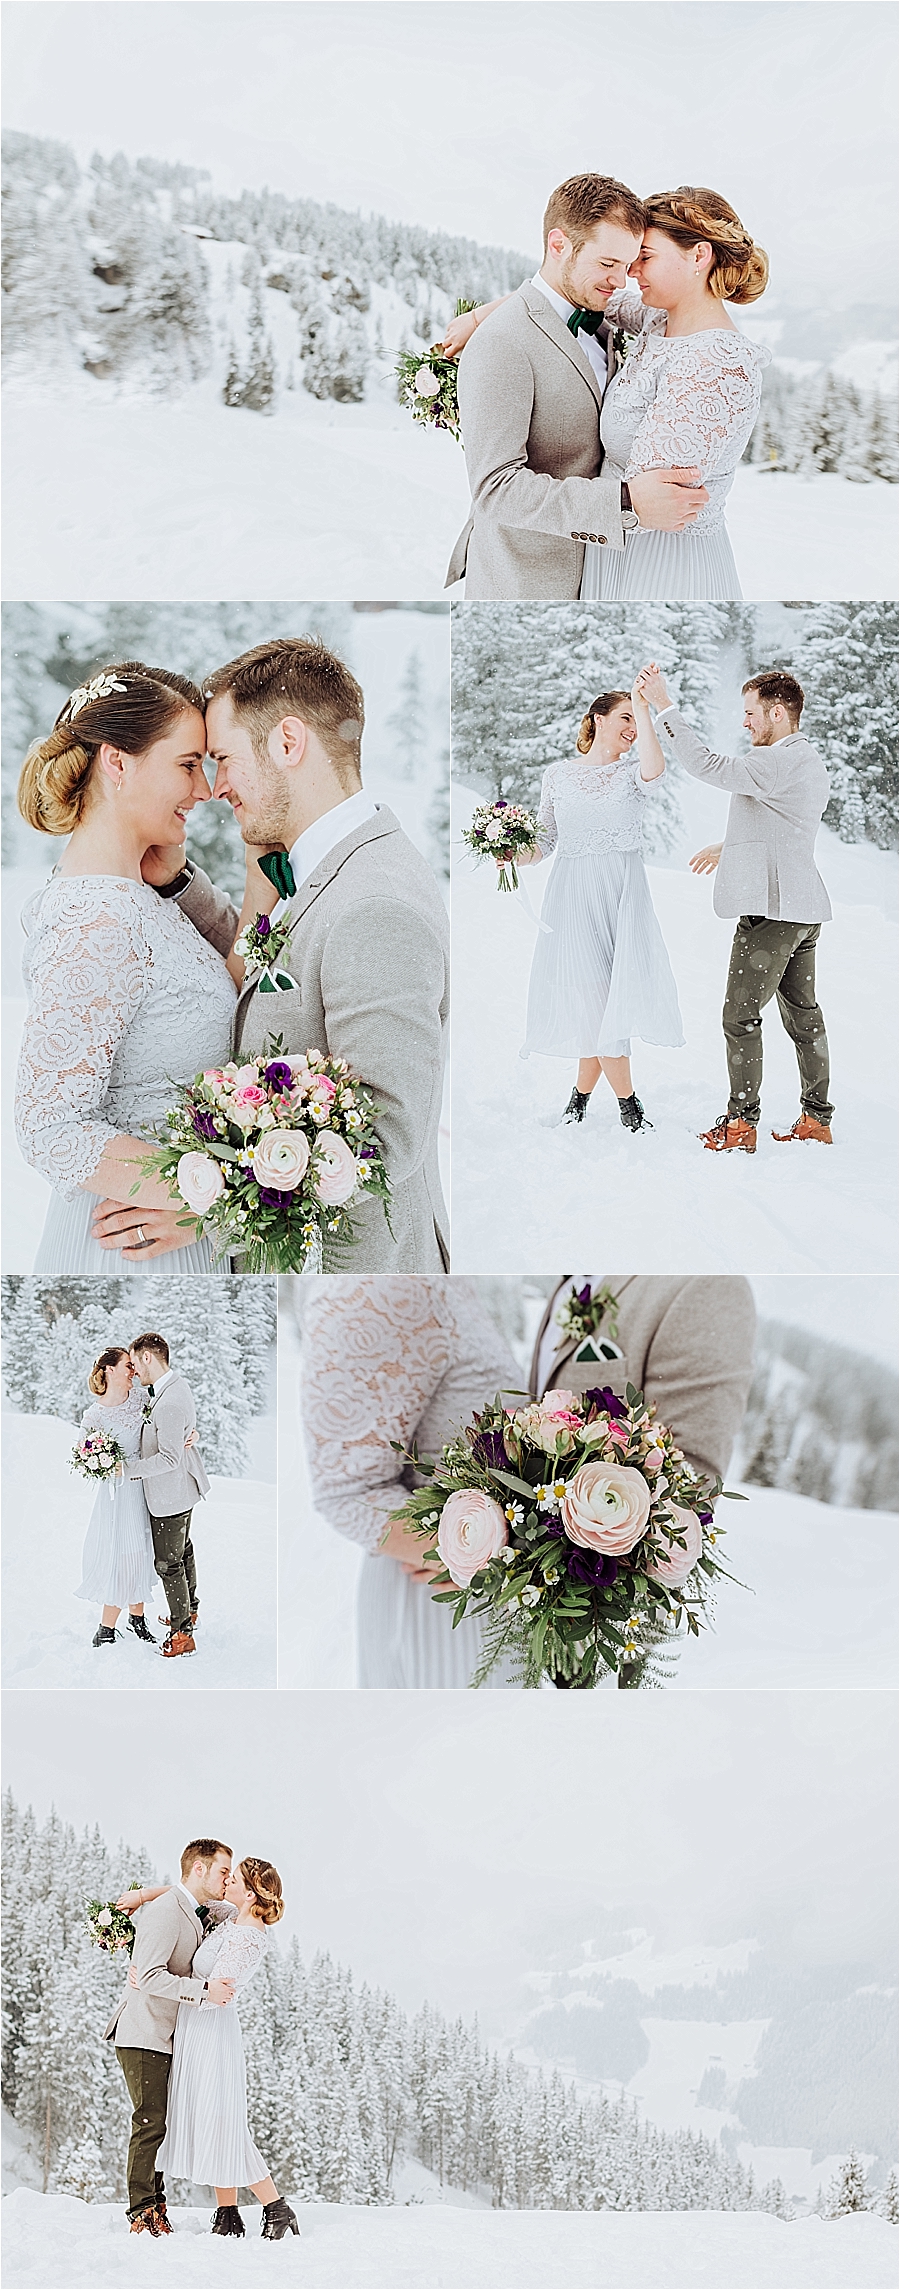 N & F dance around as the snowflakes fall for their winter mountain elopement in Mayrhofen Austria by Wild Connections Photography